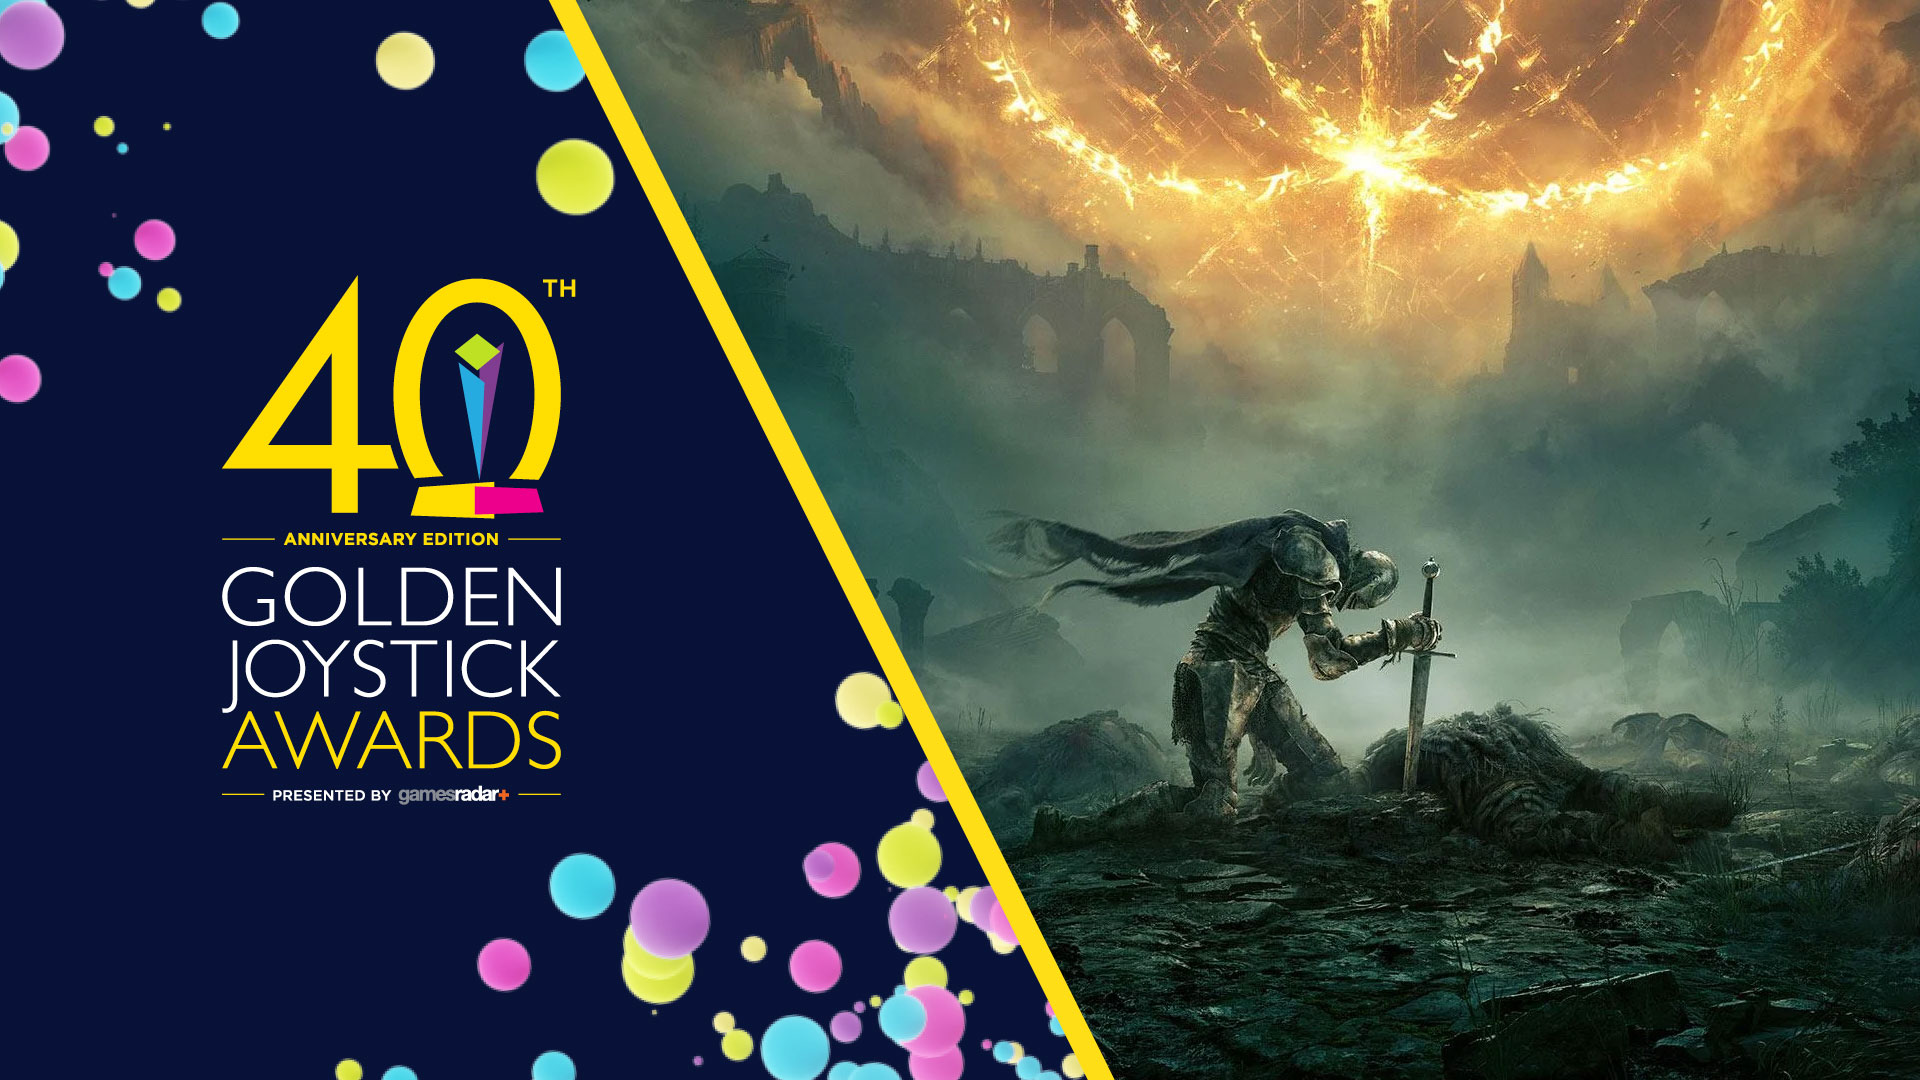 Elden Ring is the Ultimate Game of the Year at the 2022 Golden